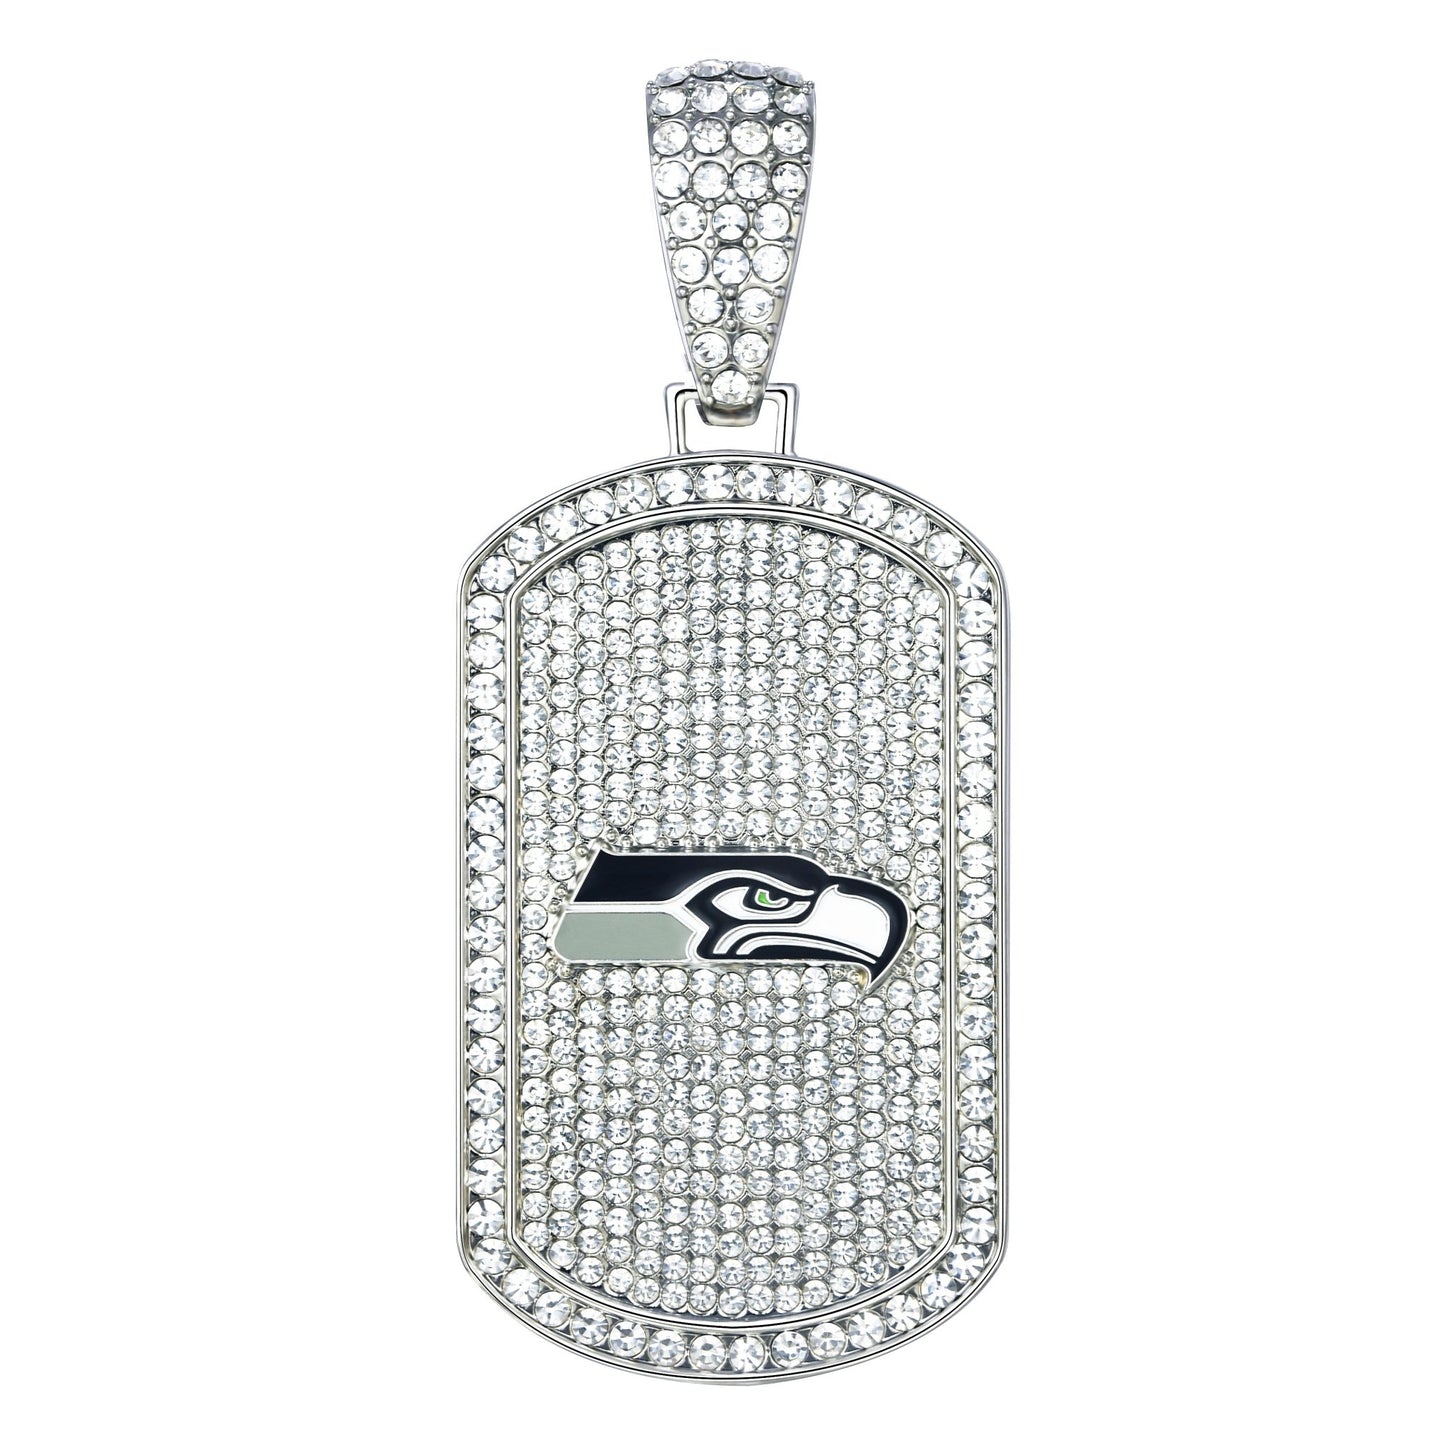 NFL Bling Dog Tag Necklace - Gamedays Gear - Seattle Seahawks